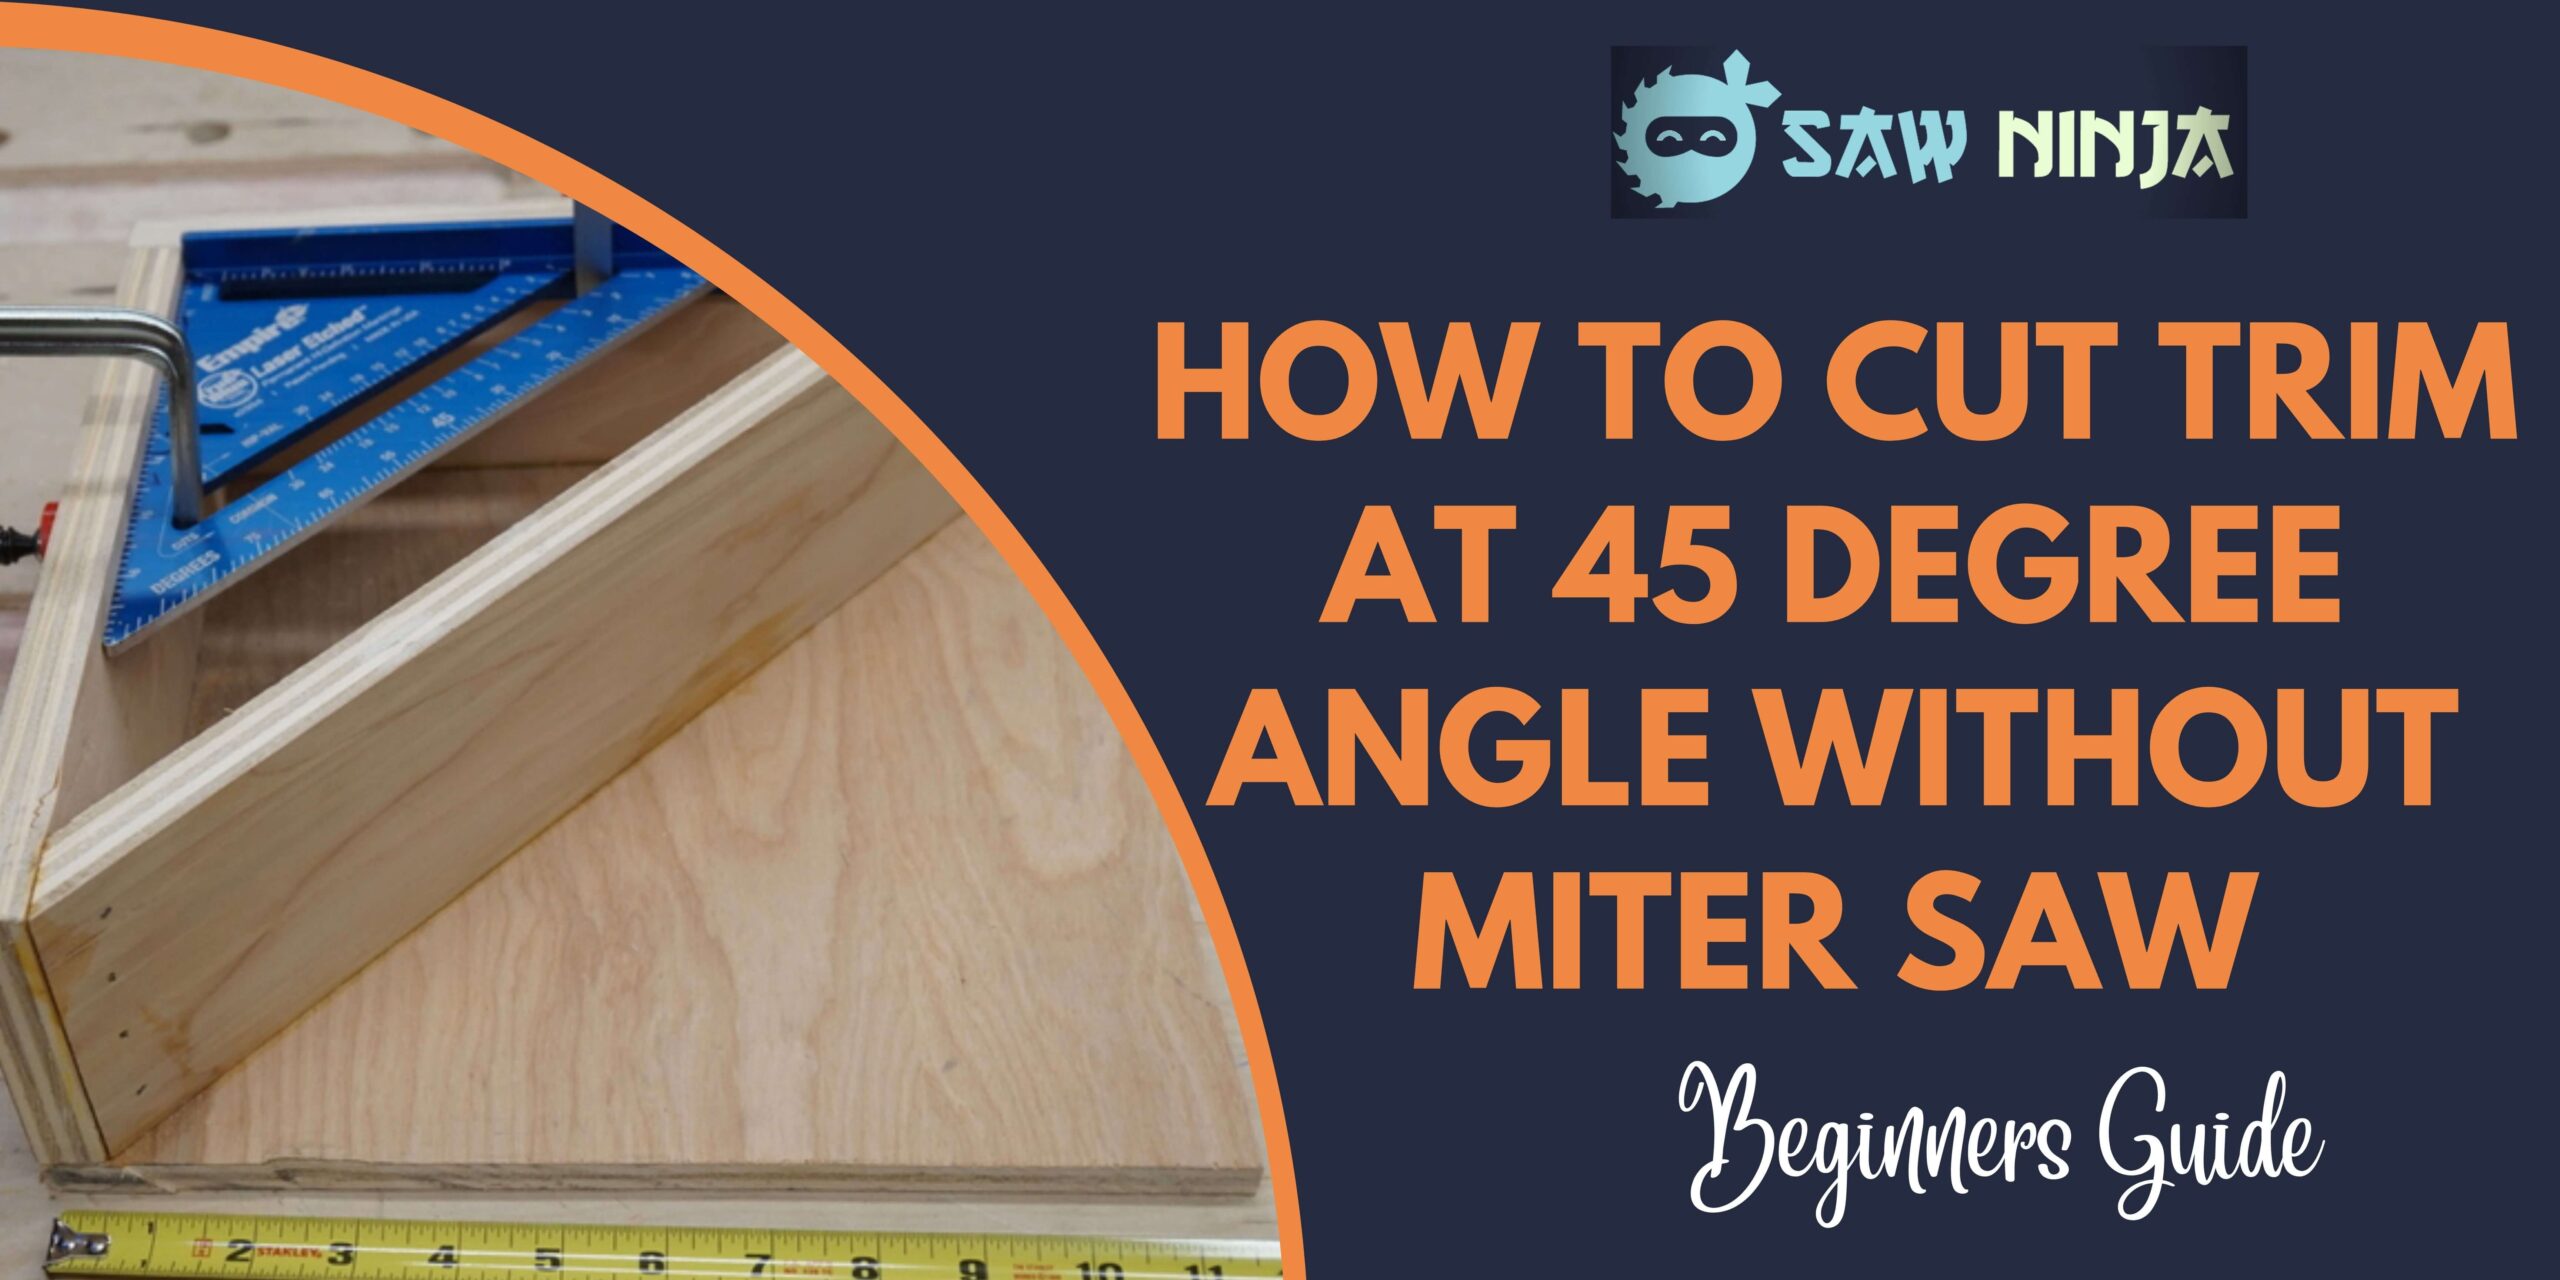 How to Cut Trim at 45 Degree Angle Without Miter Saw